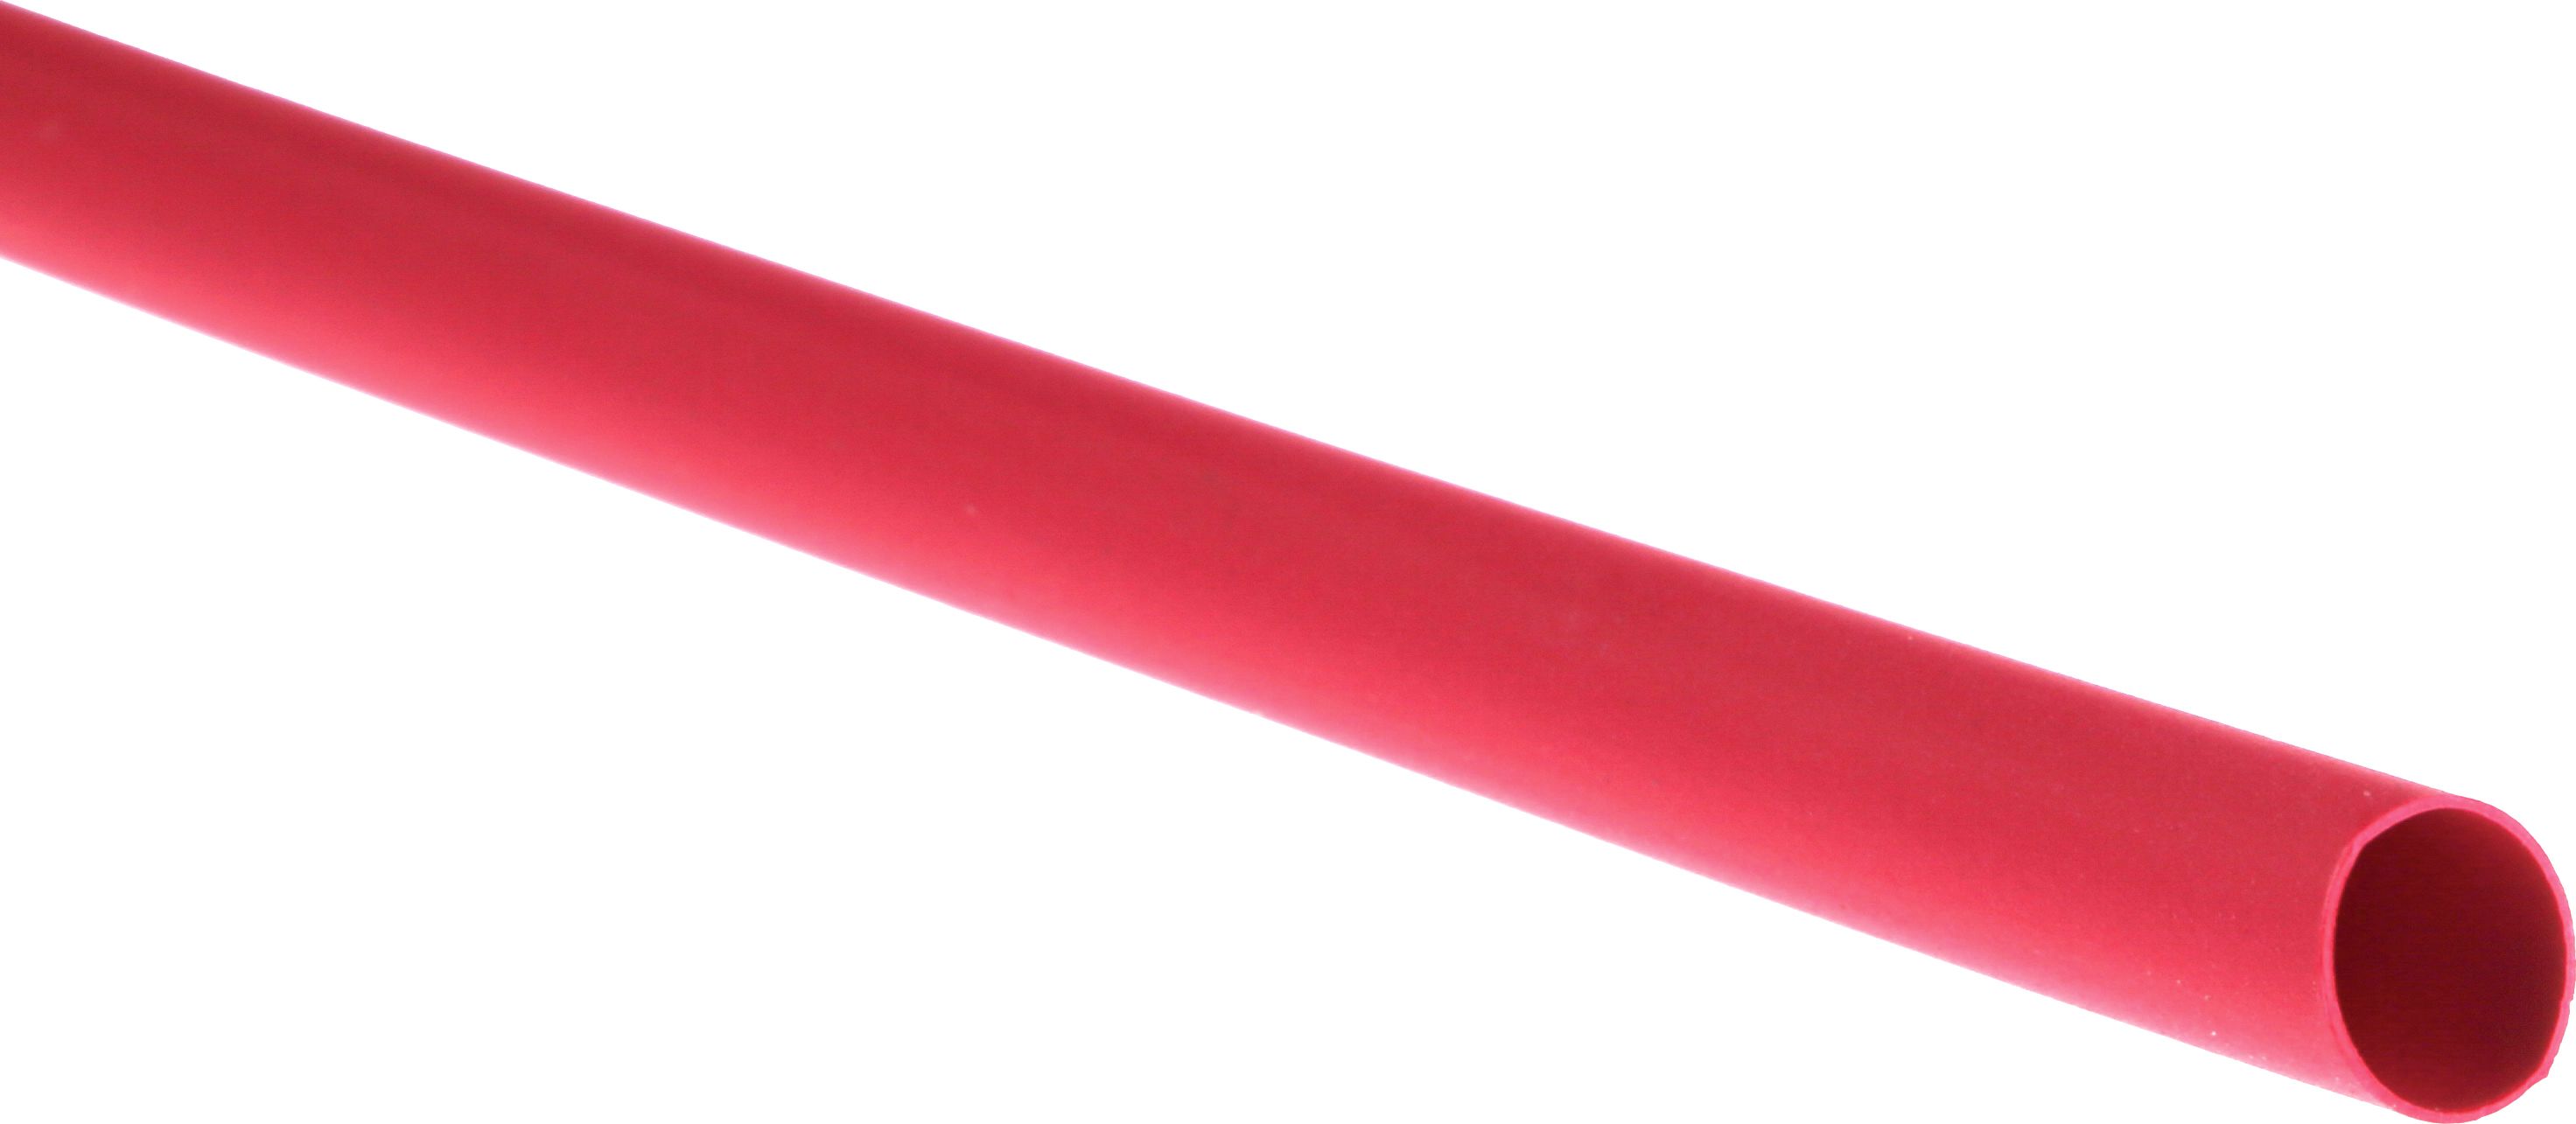 RS PRO Heat Shrink Tubing, Red 6.4mm Sleeve Dia. x 1.2m Length 2:1 Ratio